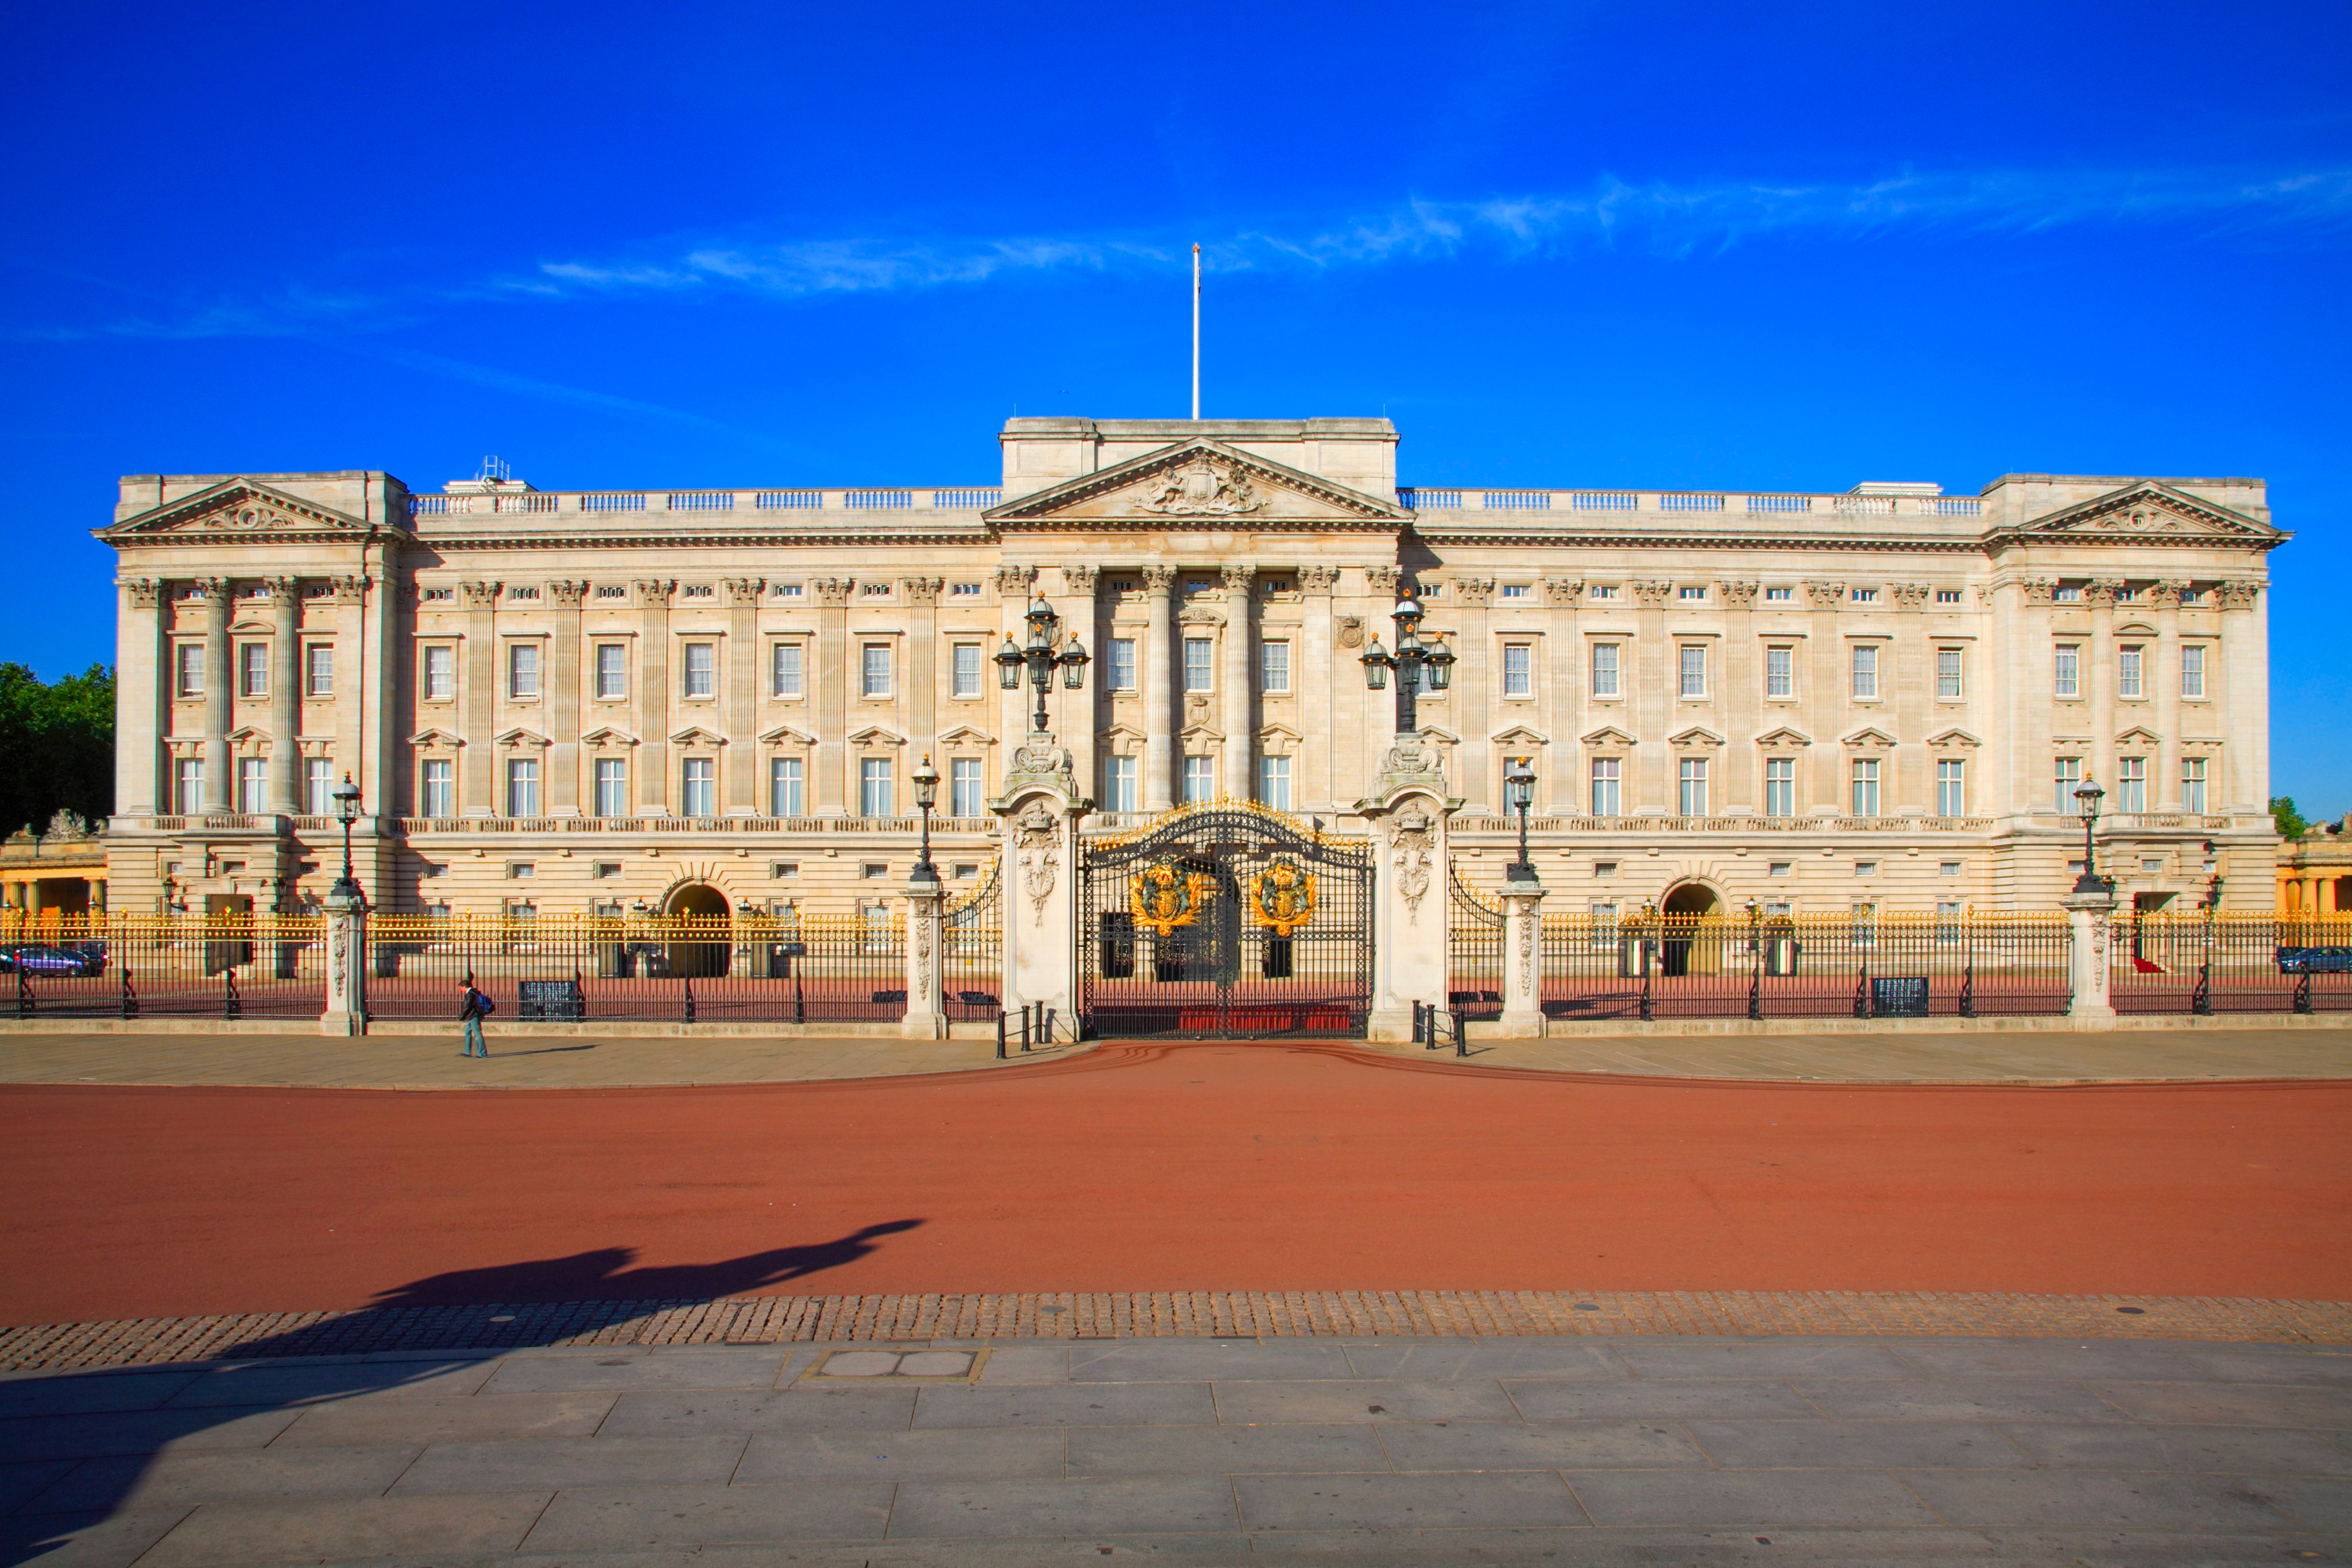 Buckingham Palace is the place to start retracing the footsteps of Britain’s Queen Charlotte. It is an extension of Buckingham House, which King George III bought for his consort as a retreat in 1761. Photo: Getty Images 